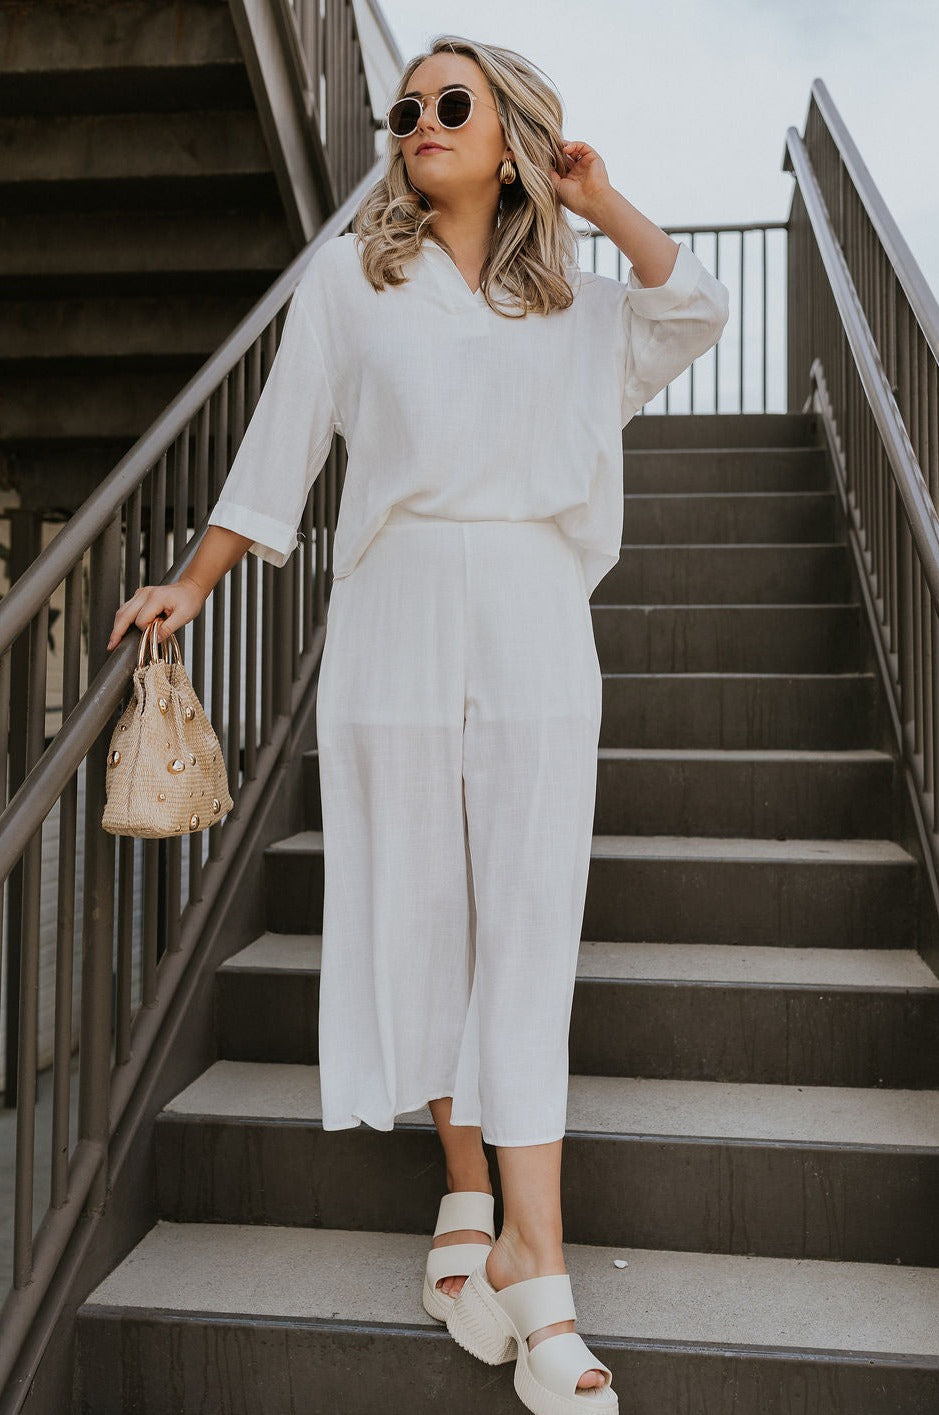 Full body view of female model wearing the ONA Streetworks Slide Heel Sandal in in Honey White & Sea Salt which features Cream Leather Lightweight Upper, Two Thick Straps, Slide-On Style, Traction Rubber Sole and 3" Heel, 1 1/14" Platform 